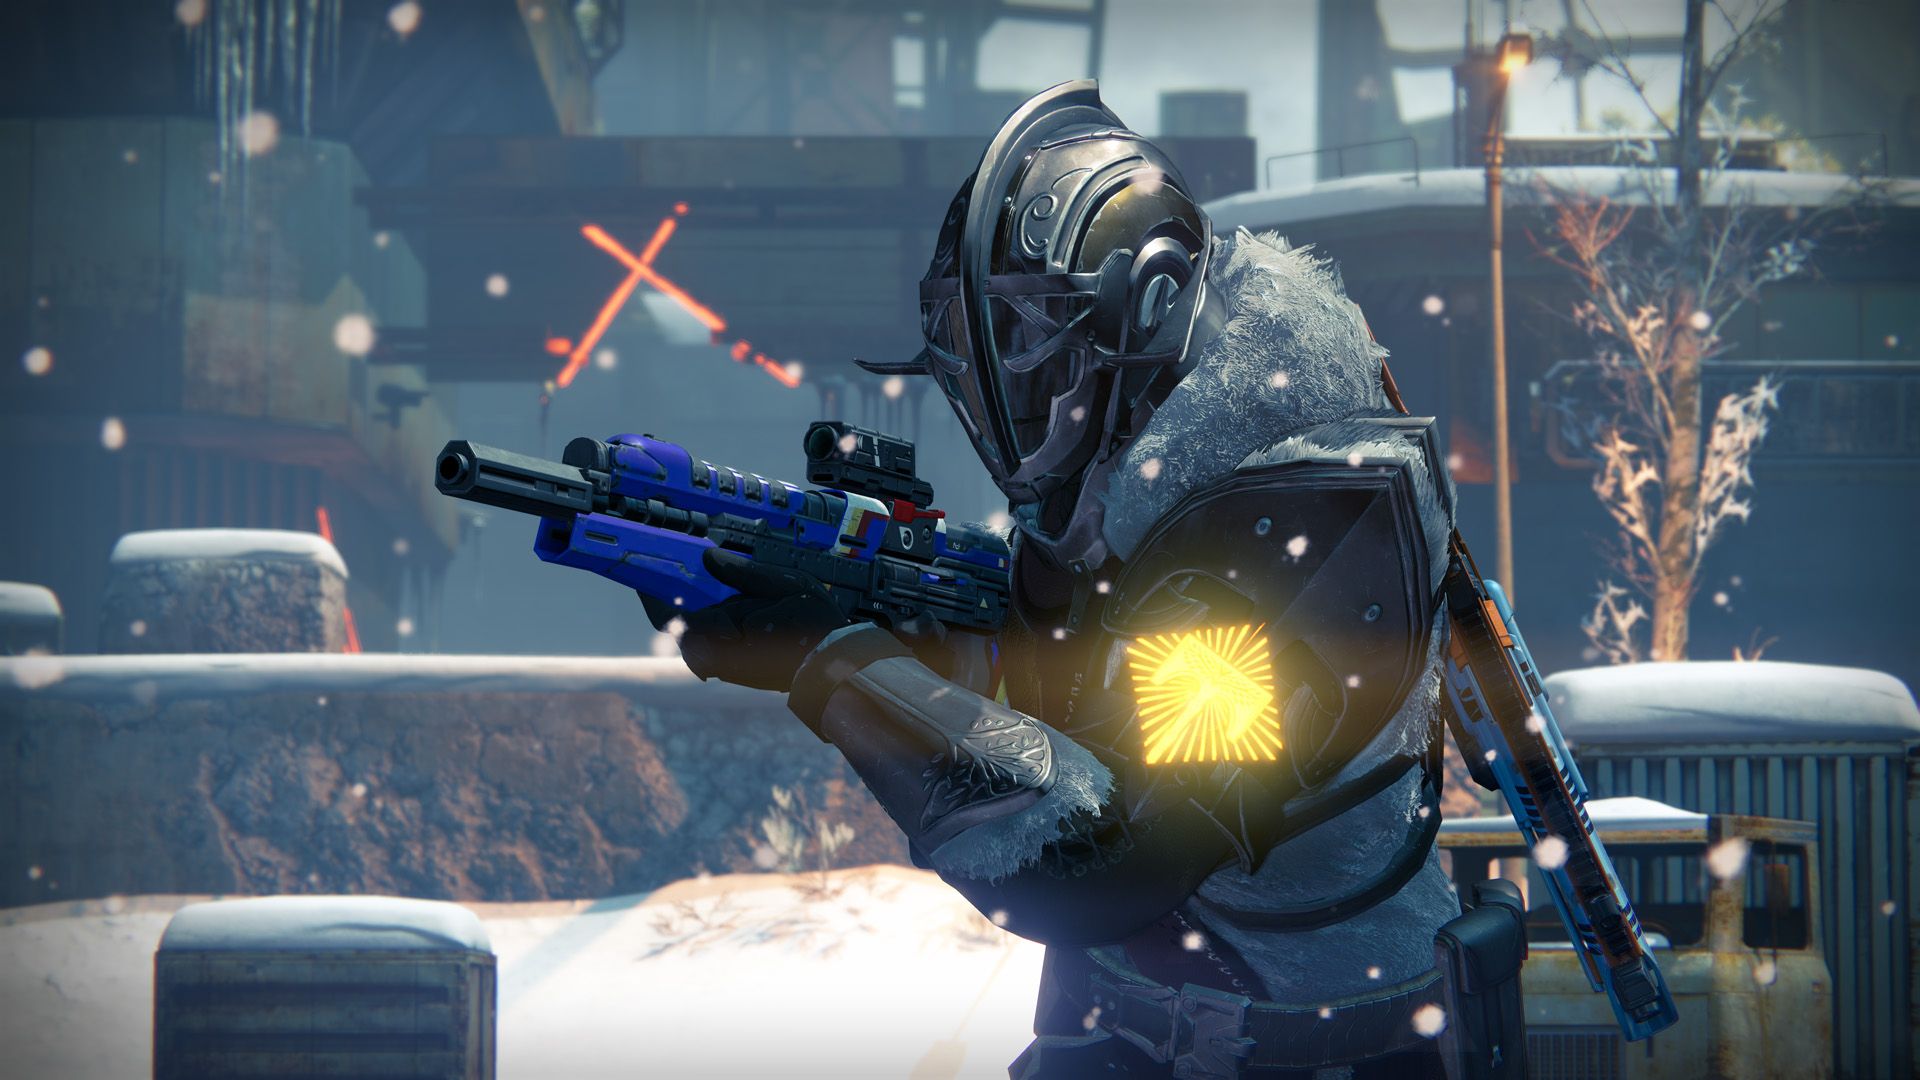 destiny-rise-of-iron-guide-2-ways-to-find-khvostov-7g-0x-exotic-weapon-parts-in-new-expansion